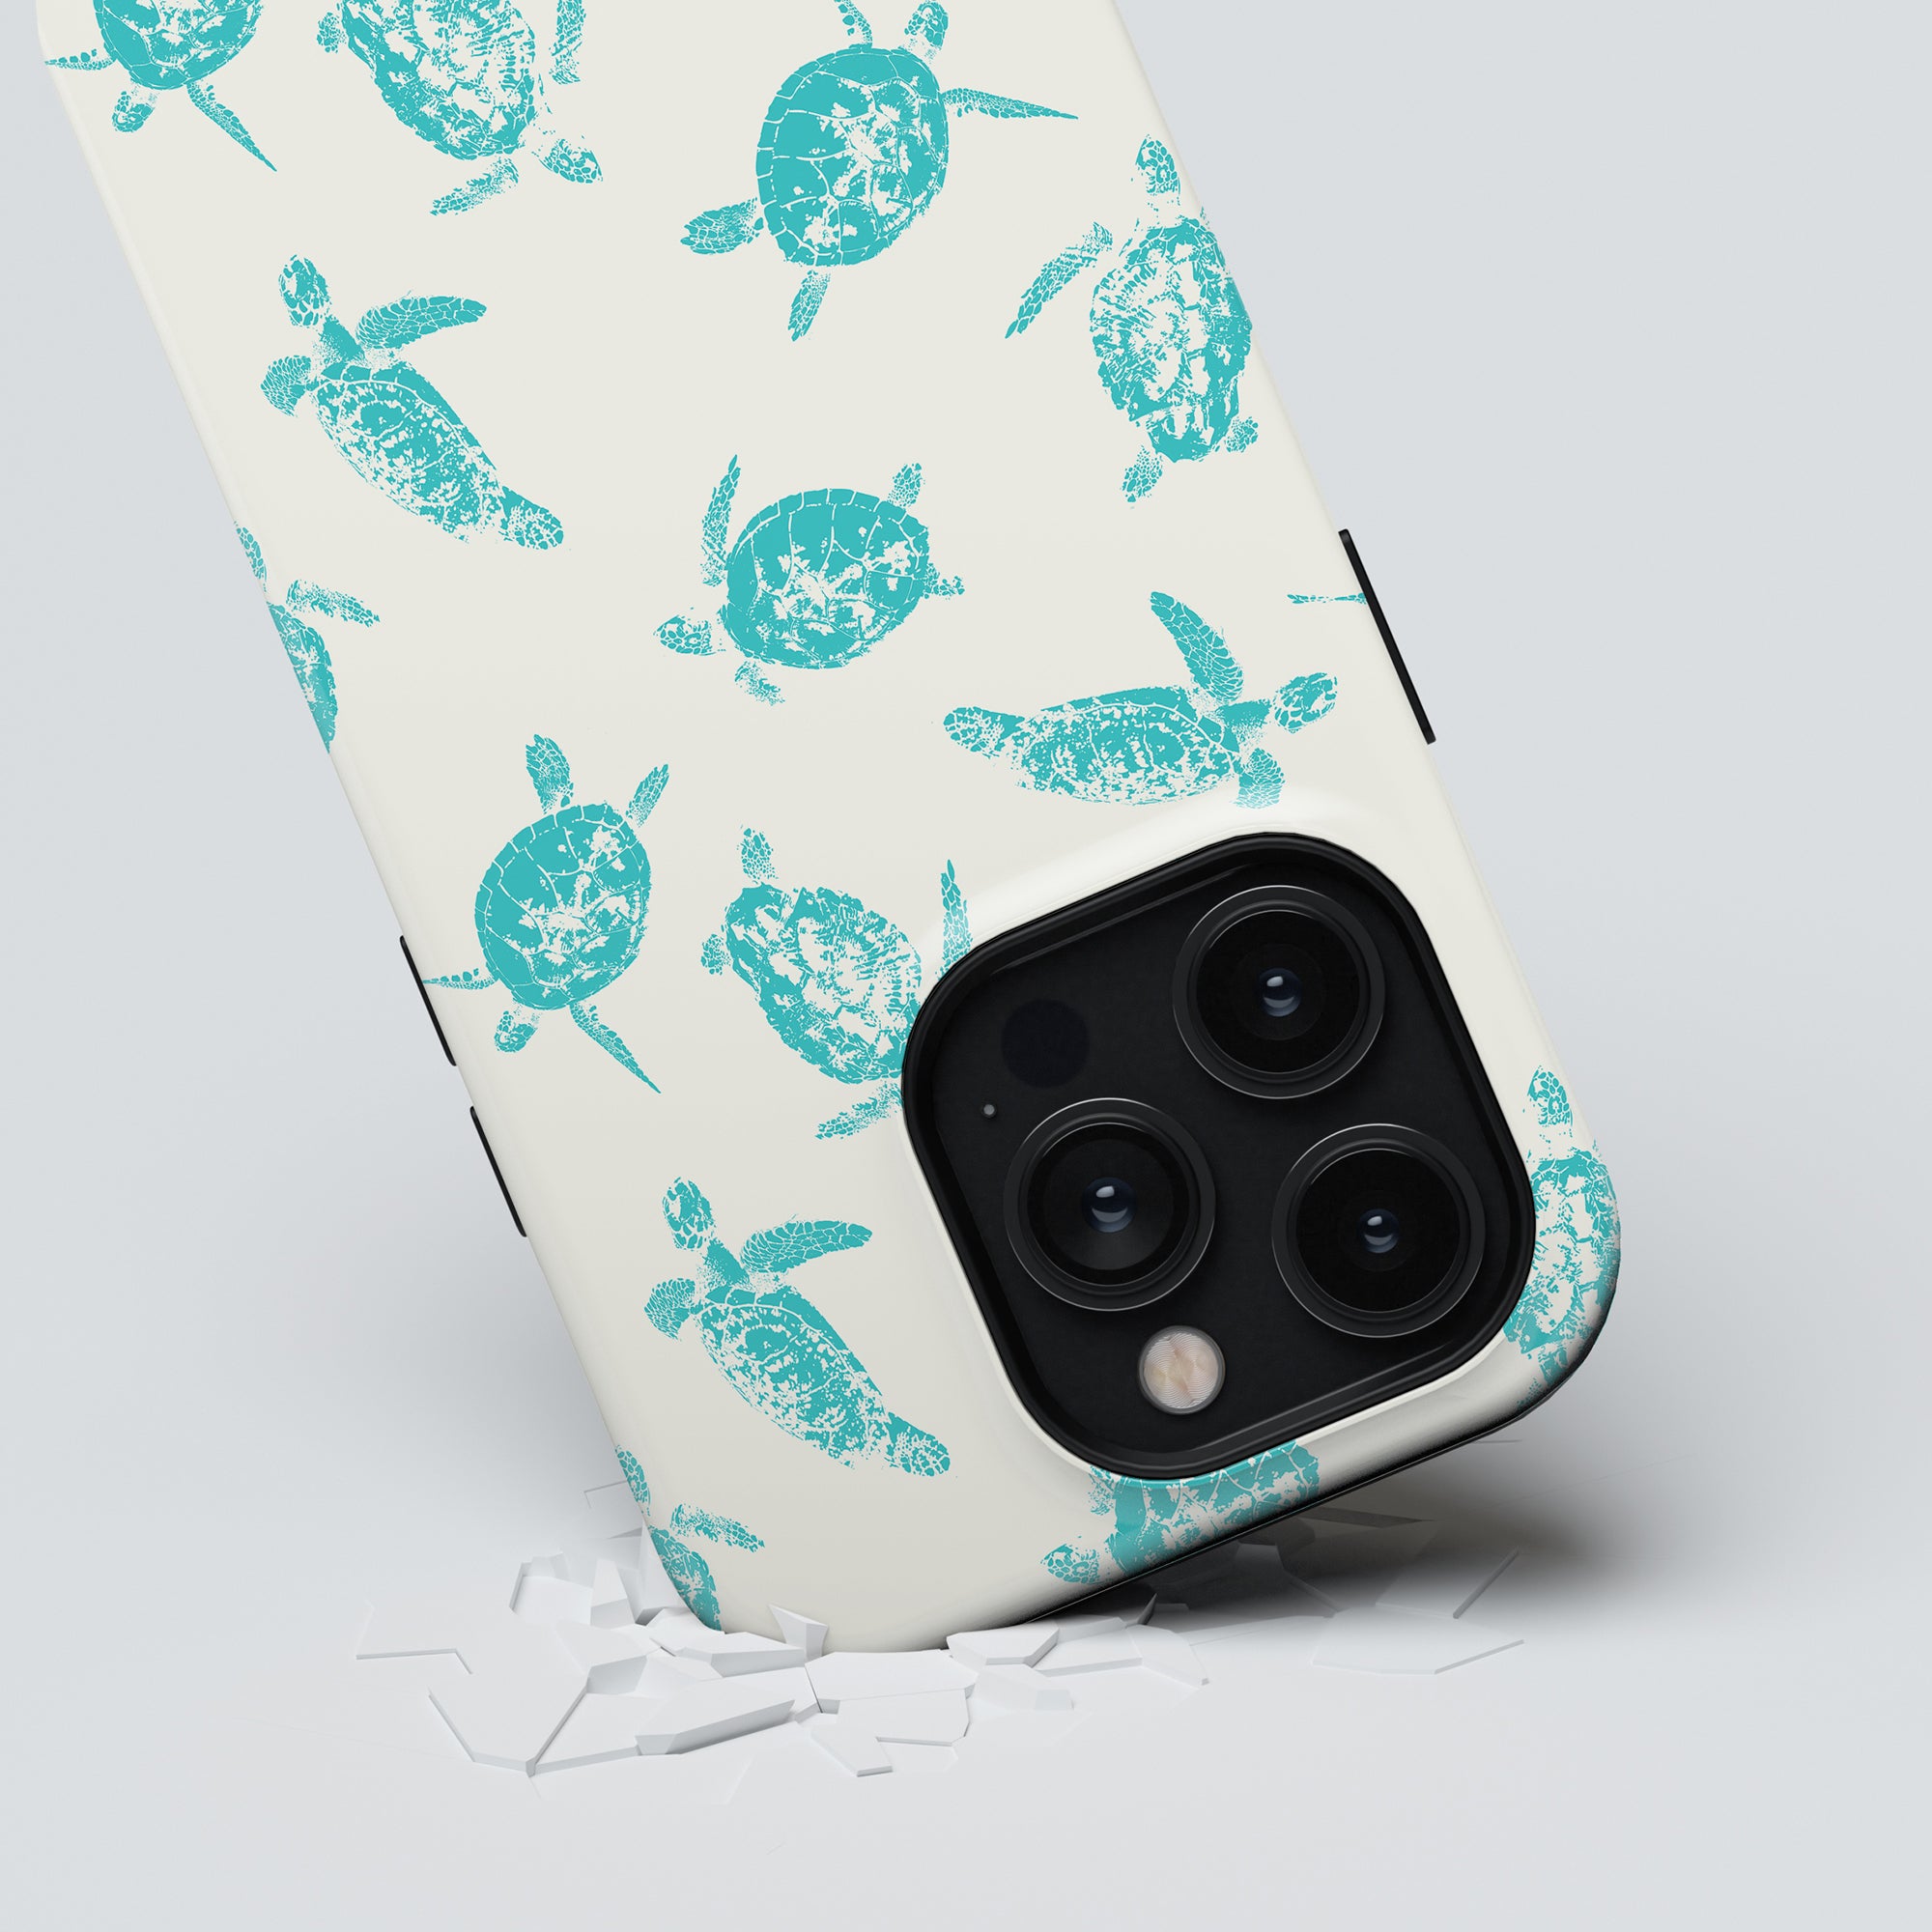 A smartphone with a Sea Turtles - Tough Case from the ocean collection partially obscuring the camera lenses, resting on a cracked surface, designed for phone protection.